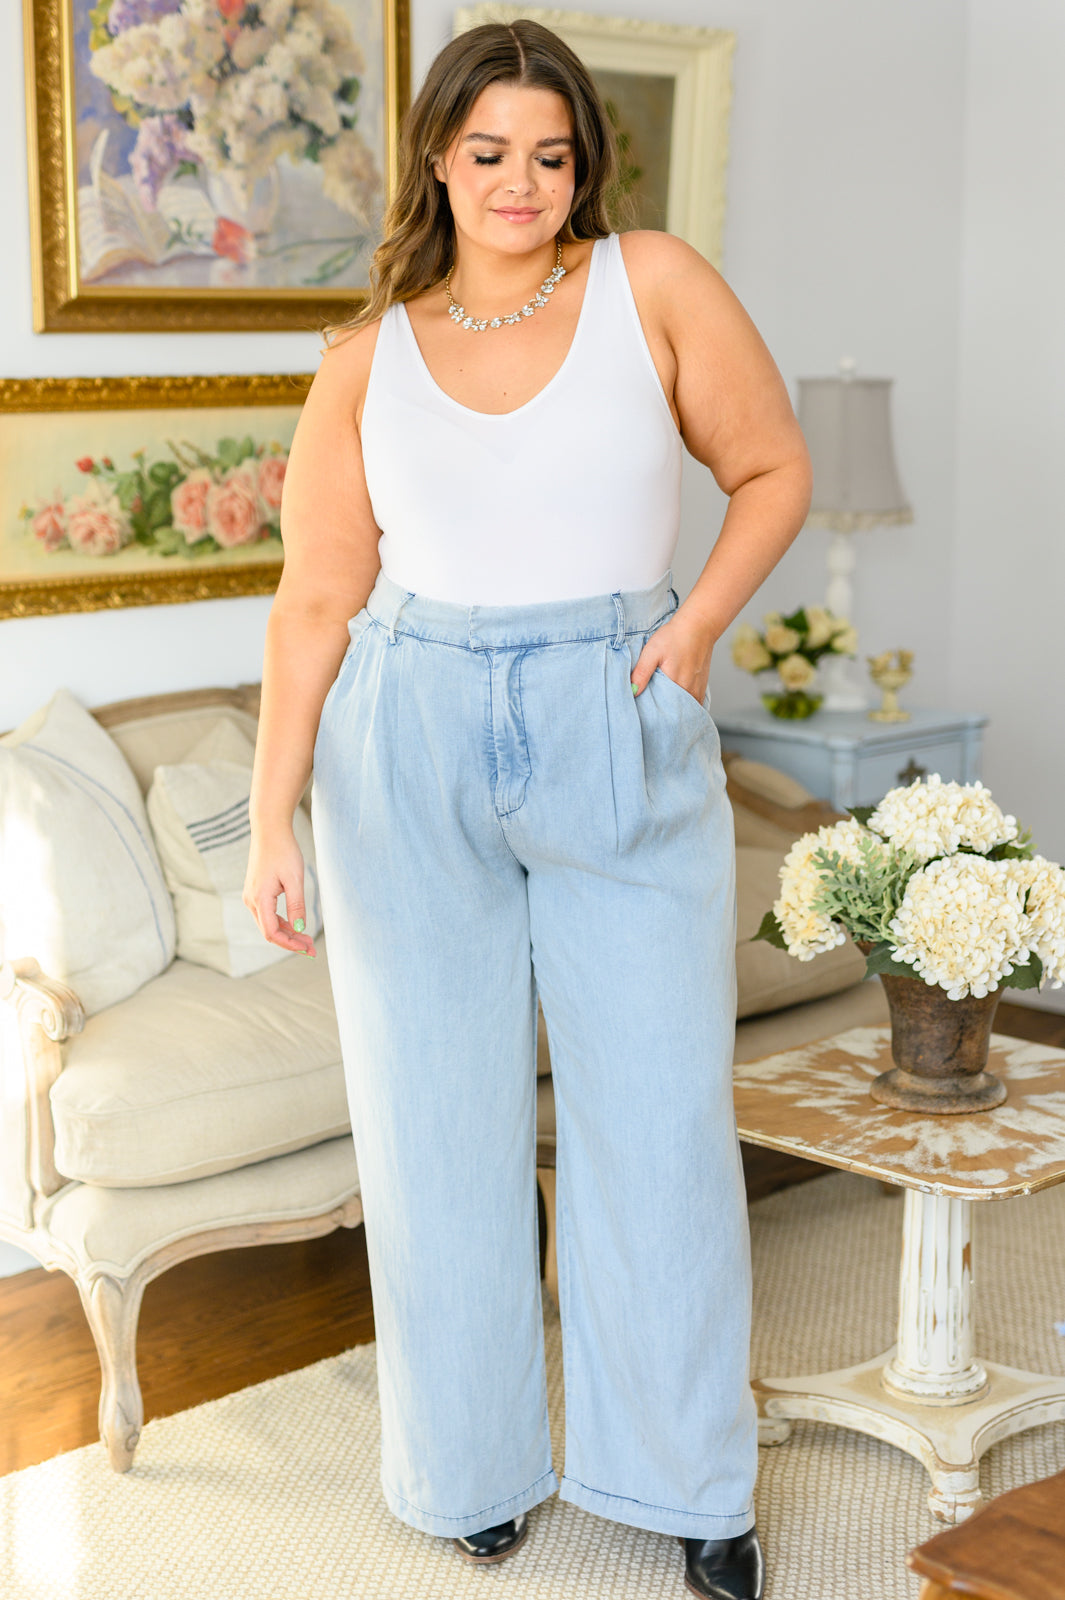 Darling High Waisted Solid Woven Pants in Denim